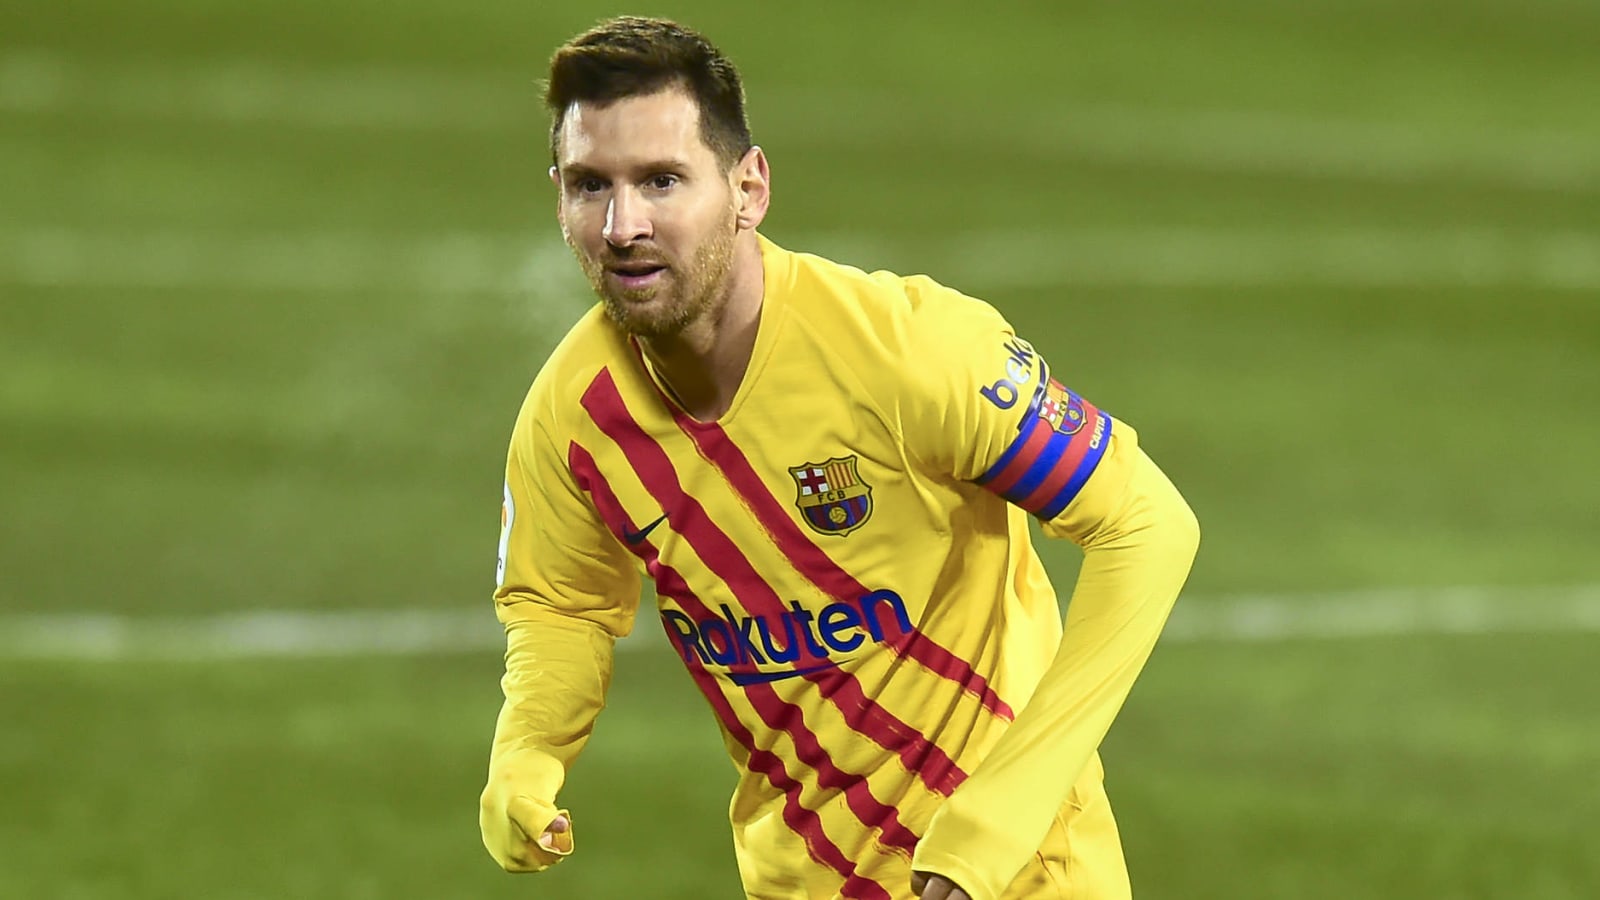 Report: Messi, Barca to sue over contract leak